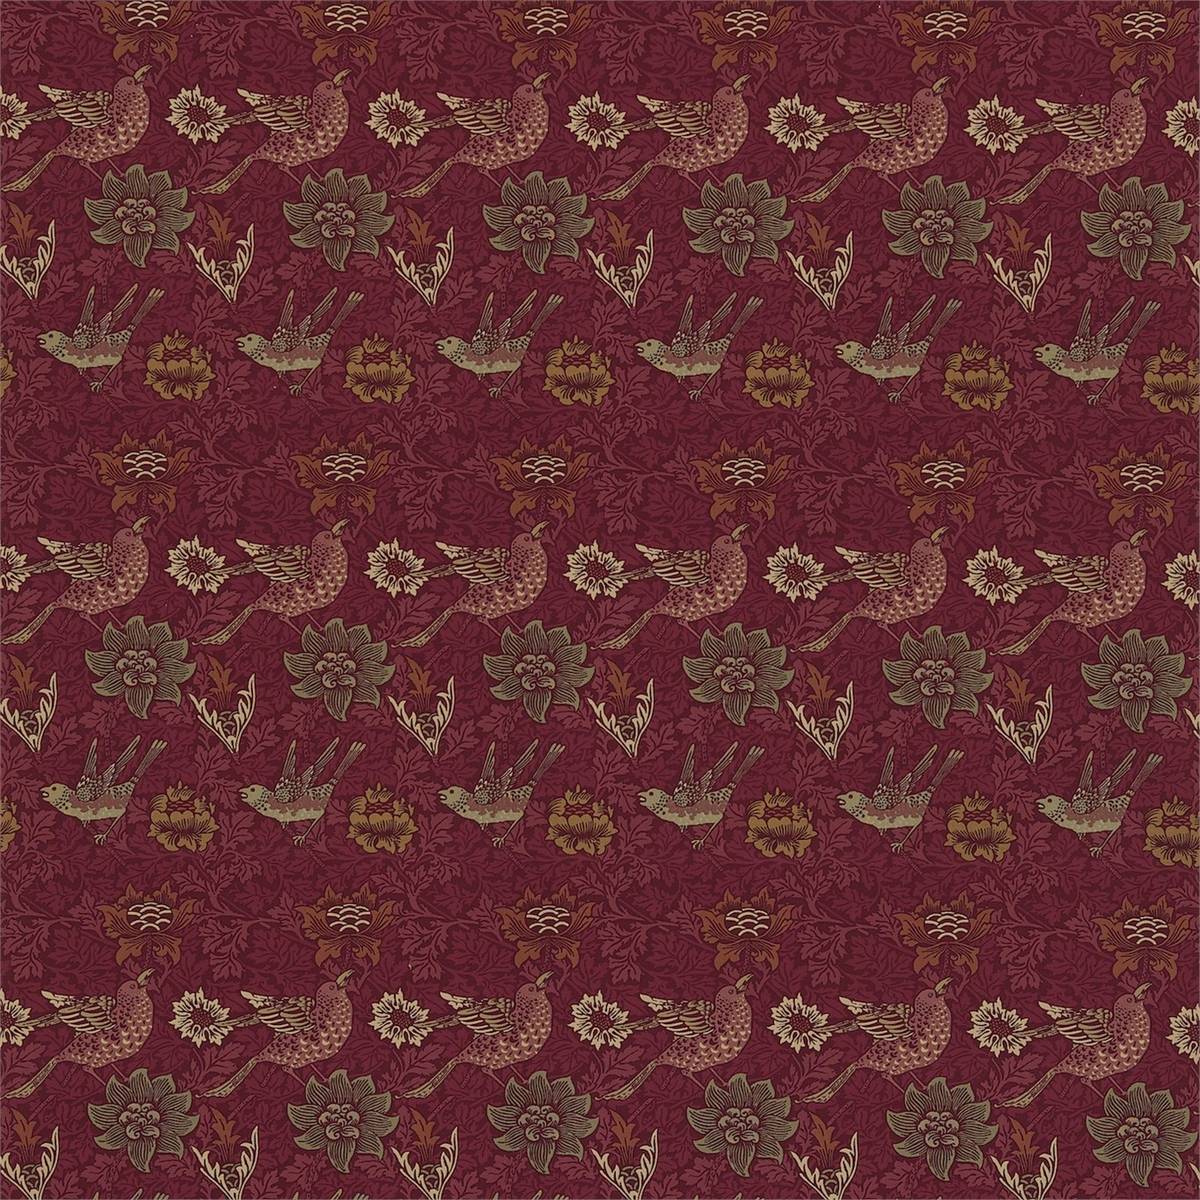 Bird & Anemone Red Clay Fabric by William Morris & Co.